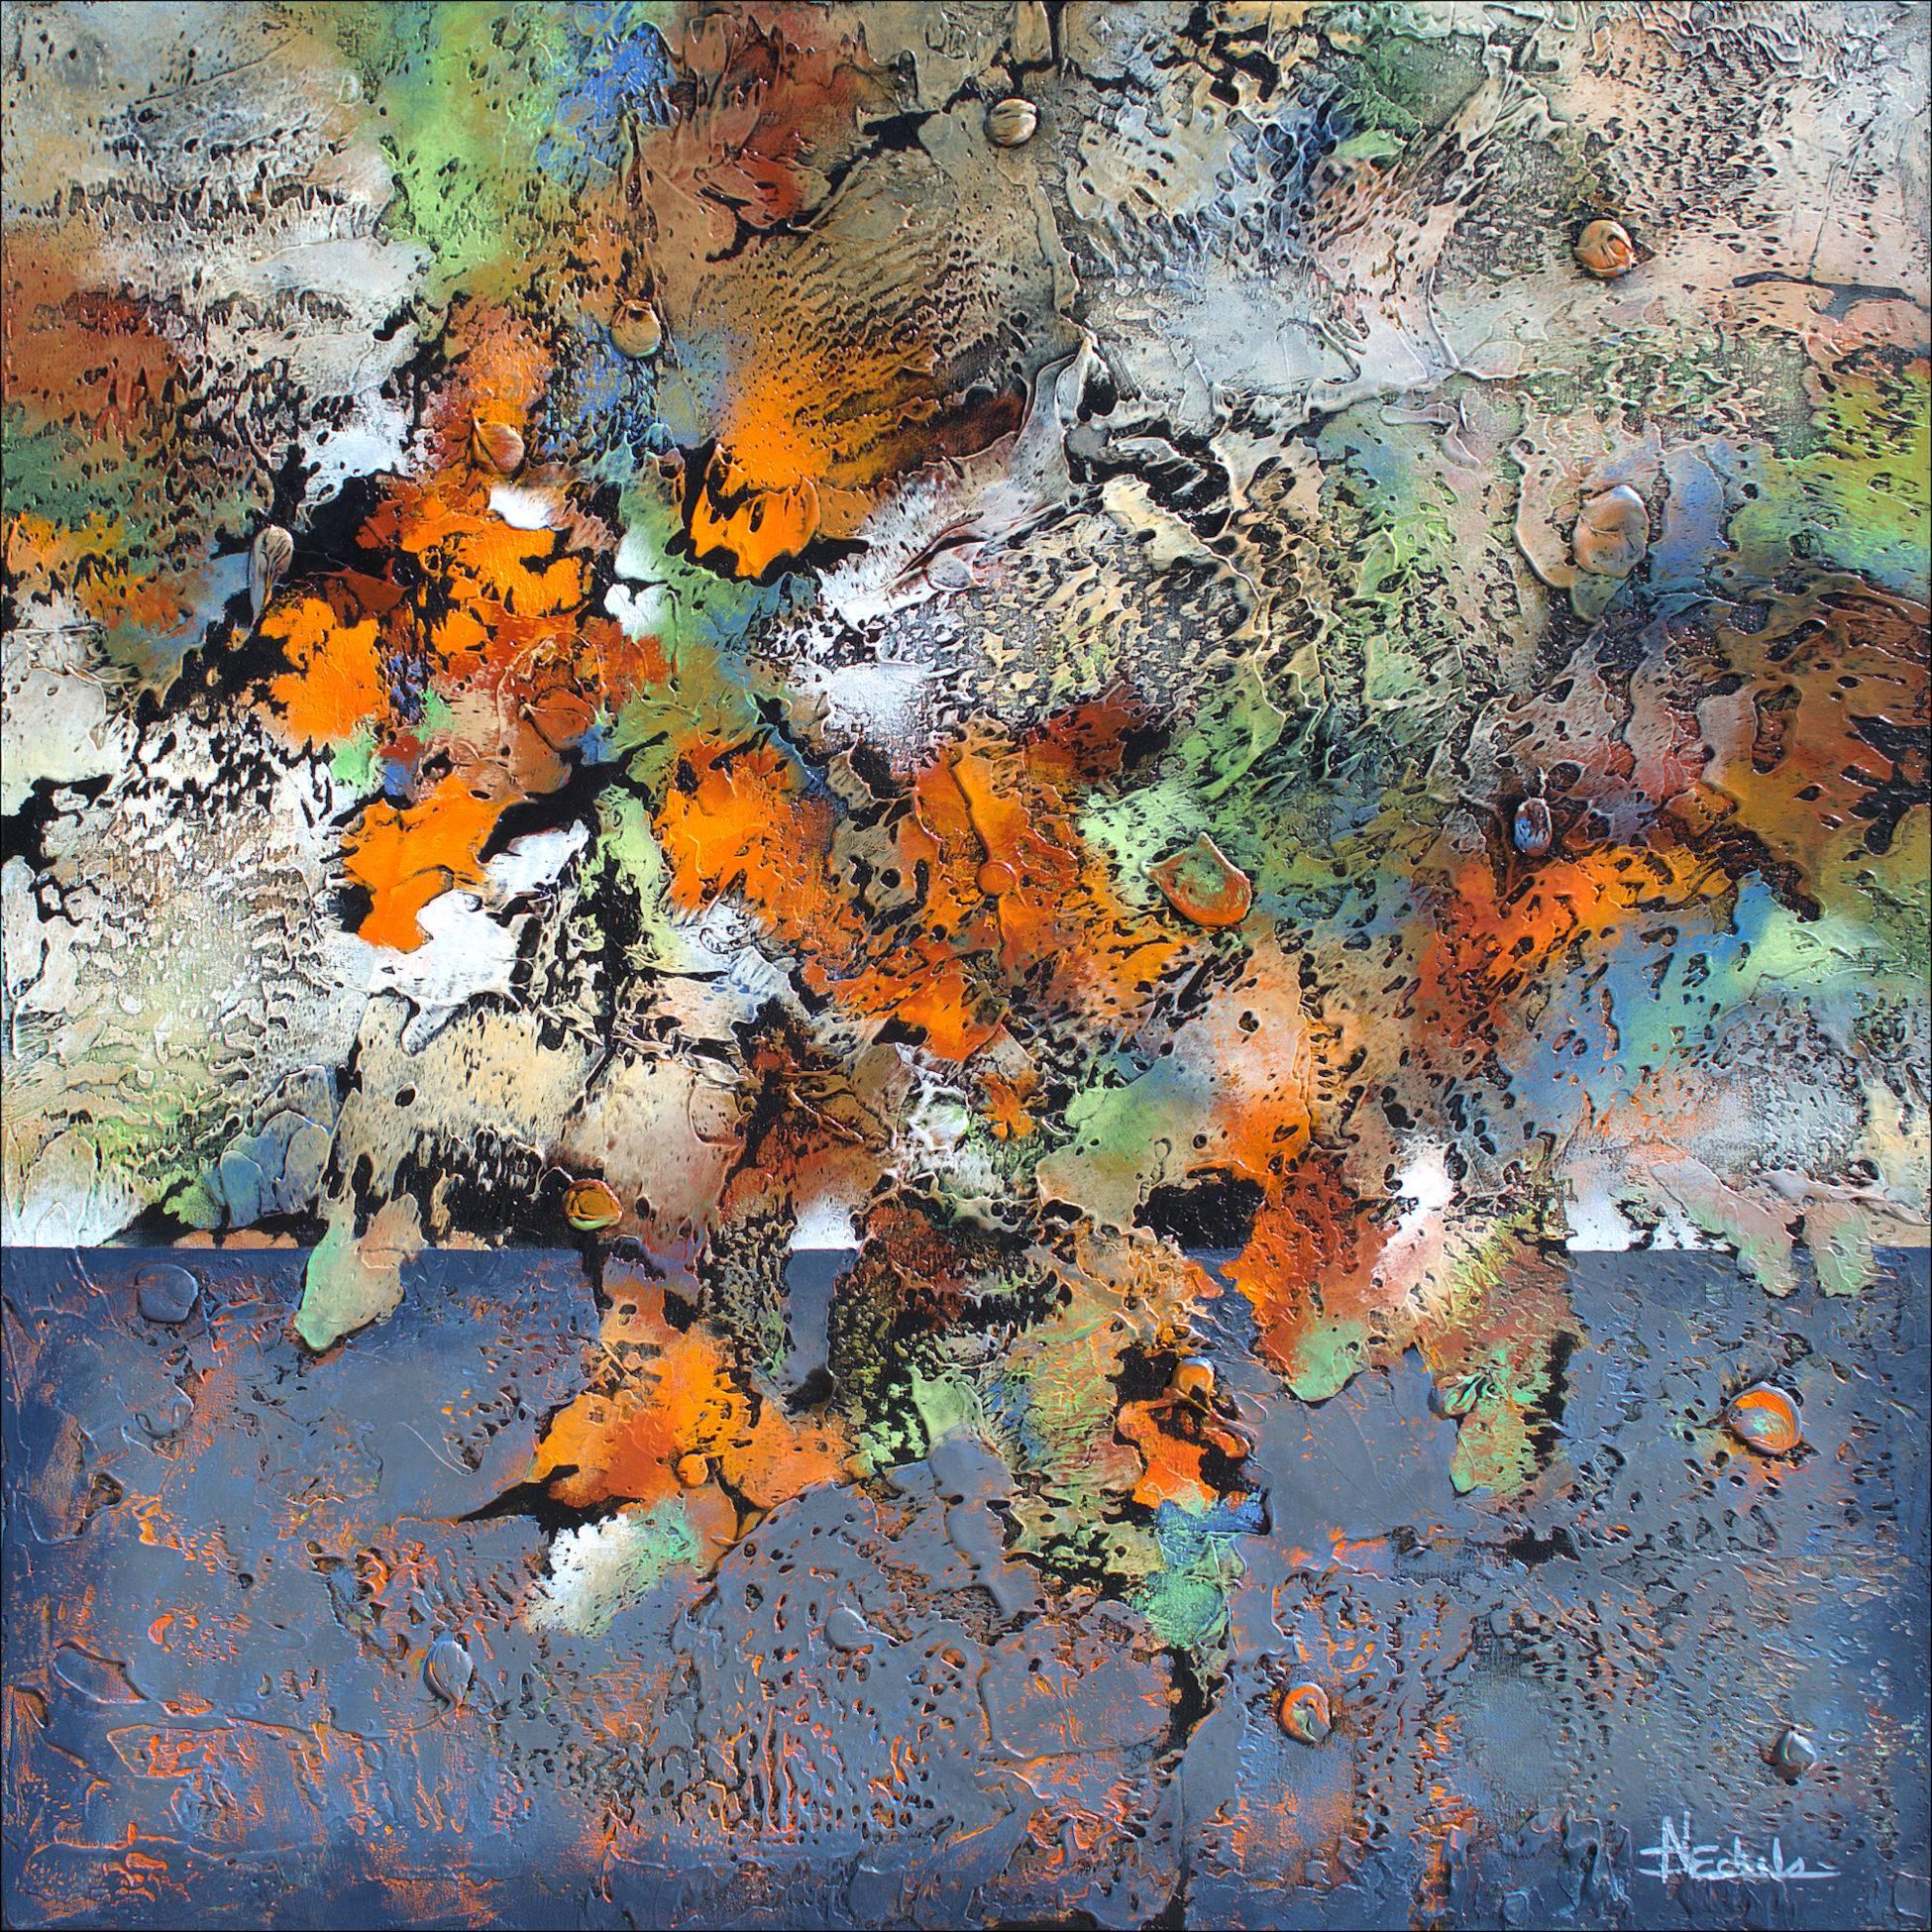 "Autumn Bonanza" is a beautiful abstract painting by Nancy Eckels that exhibits the bold colors and textures that her work is known for. Using sculptural texture with beautiful blues, lavender, and oranges,  contrasted with flowing white and gold